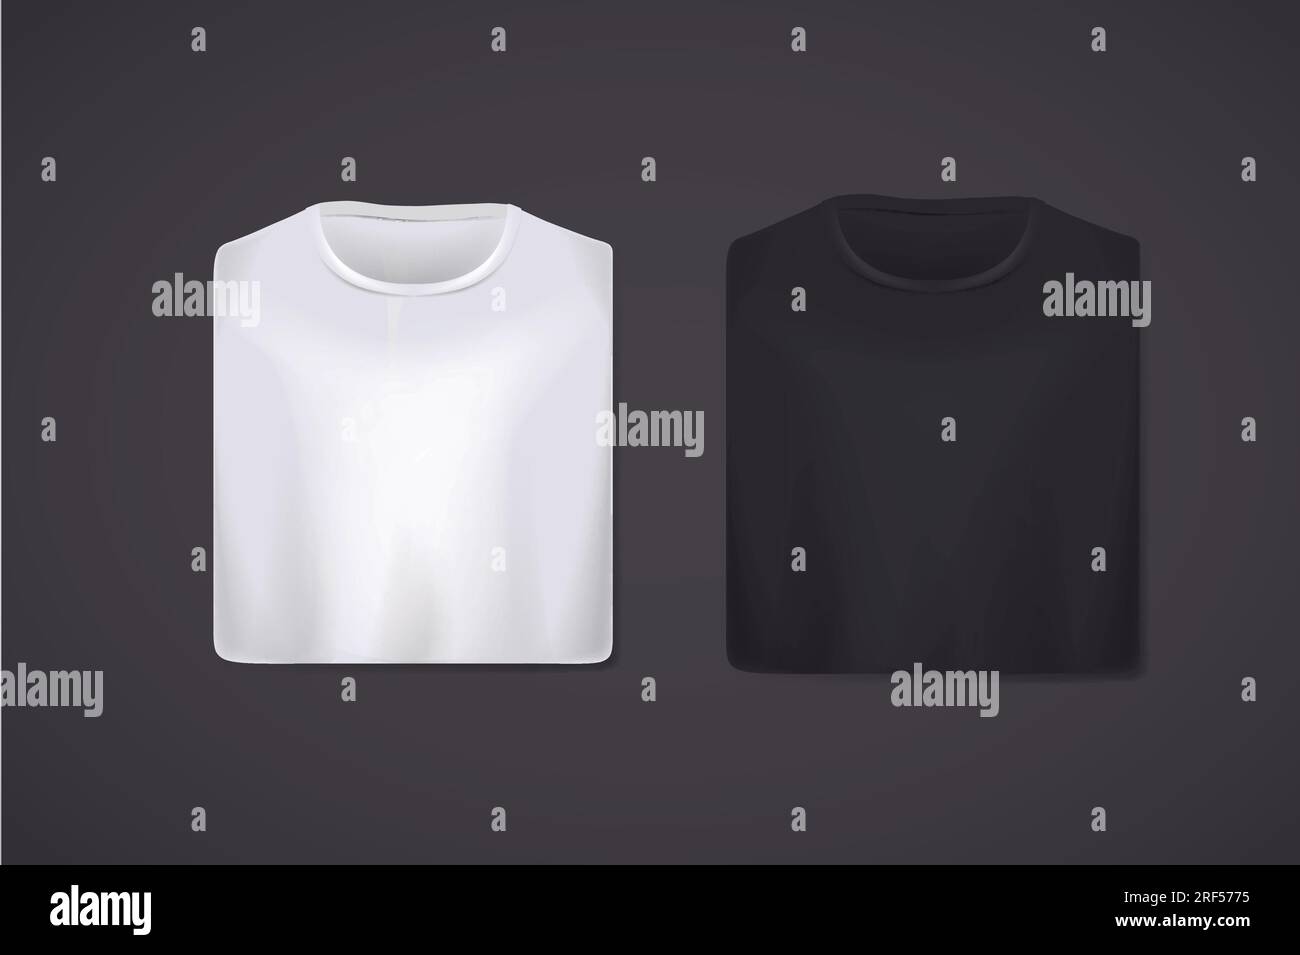 Black and white folded t-shirts mockup isolated. Stock Vector